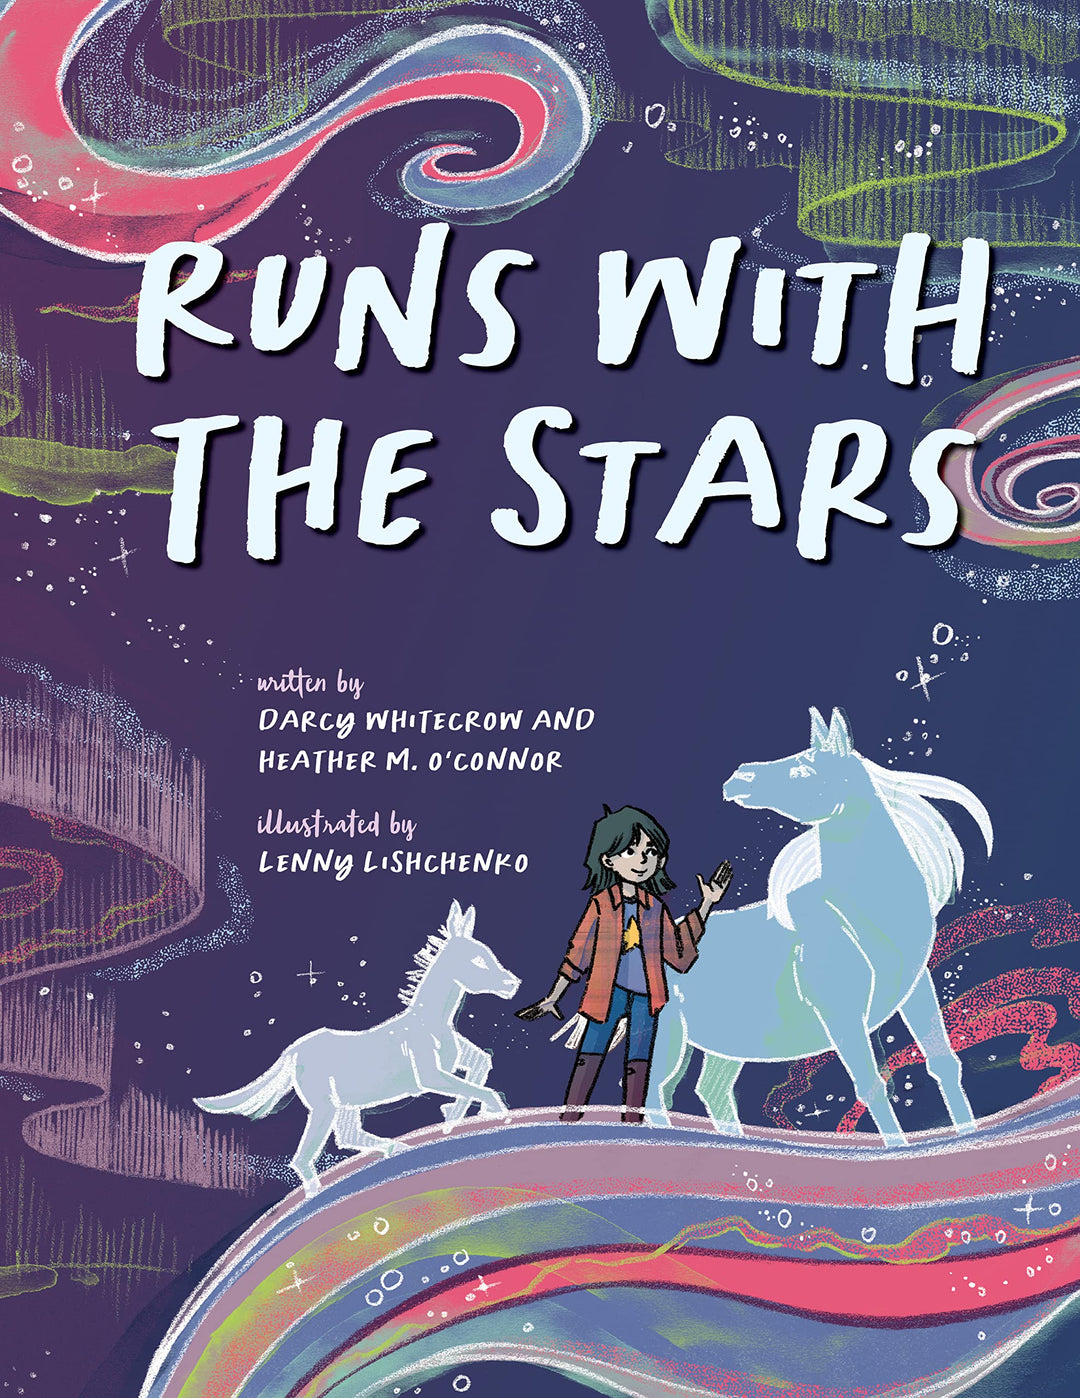 Runs with the Stars by Darcy Whitecrow & Heather M. O'Connor